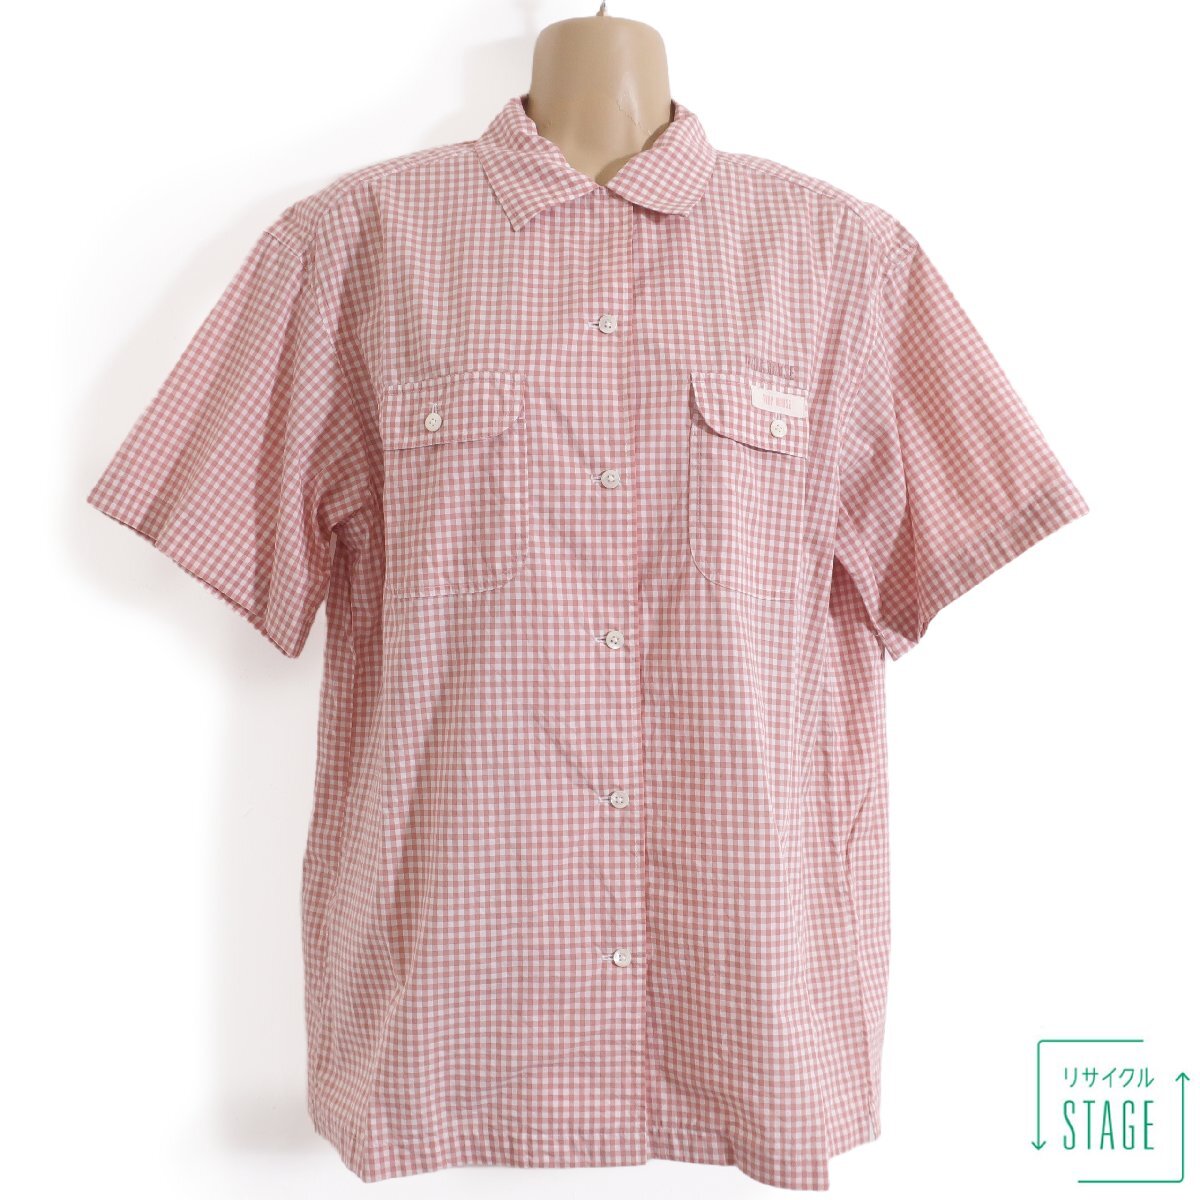 PINK HOUSE ( stock ) Pink House * shirt . collar short sleeves pocket design silver chewing gum check left .. Logo M size .... pink series *z6825